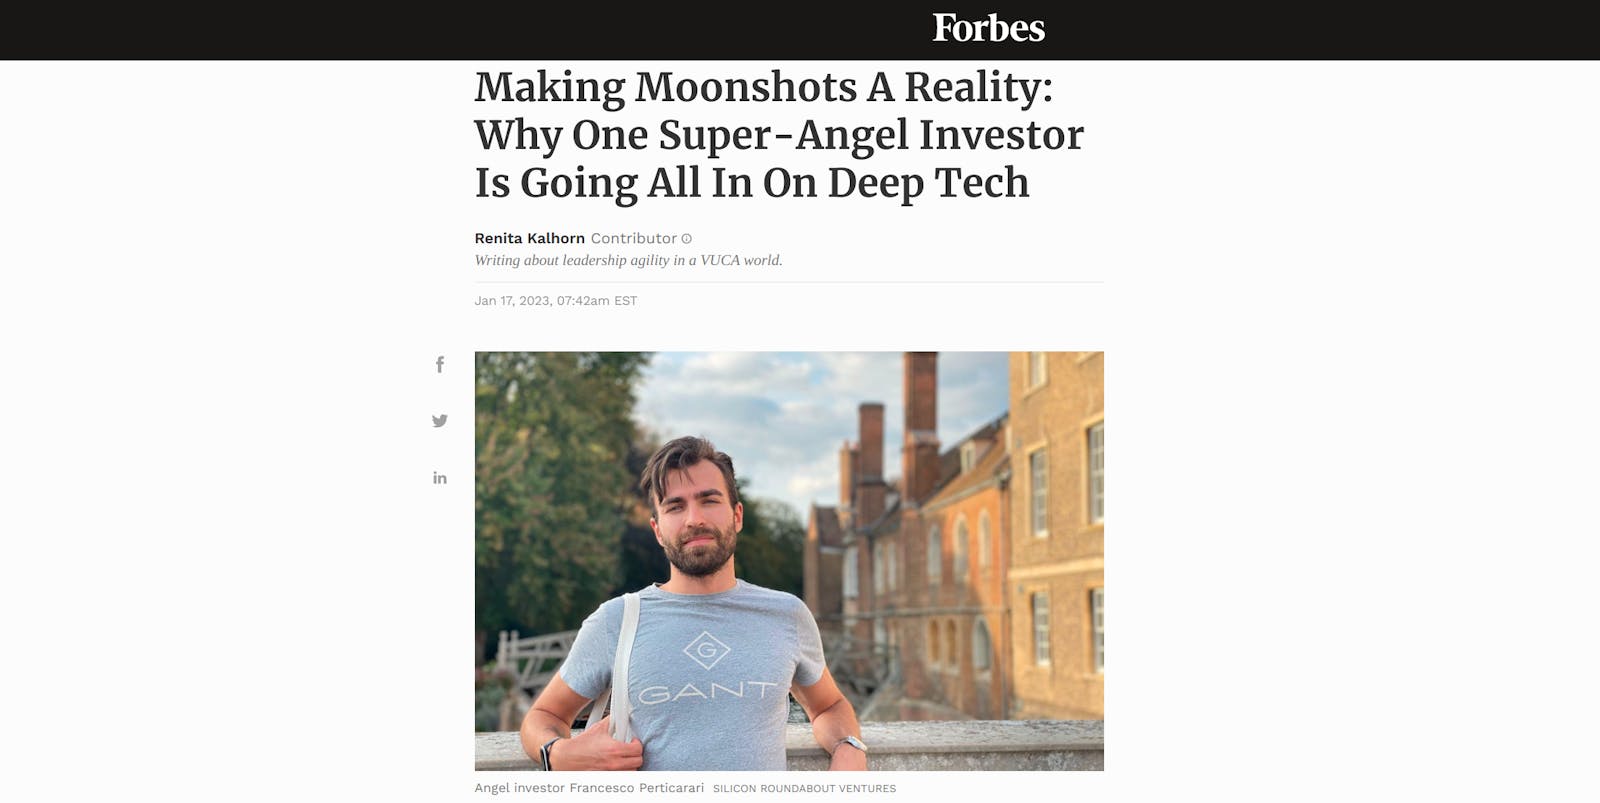 Making Moonshots A Reality: Why One Super-Angel Investor Is Going All In On Deep Tech